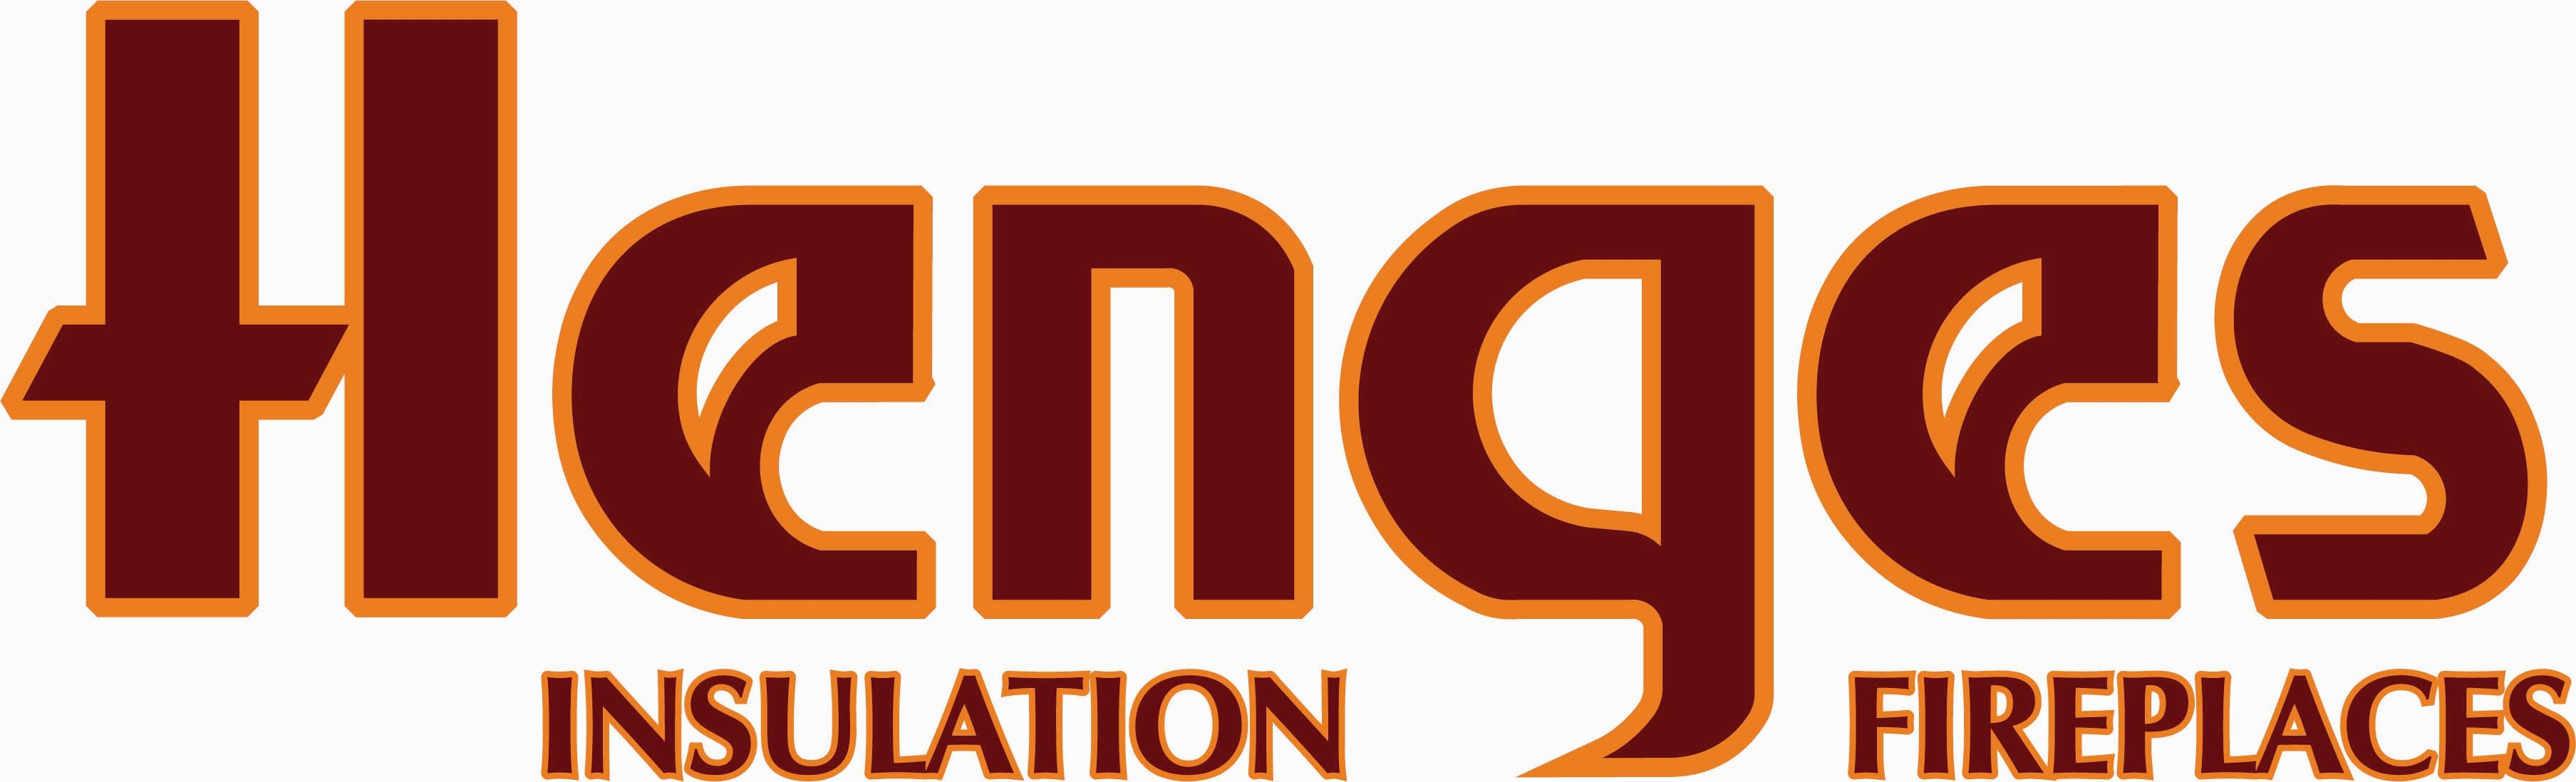 Henges Insulation and Fireplaces Logo